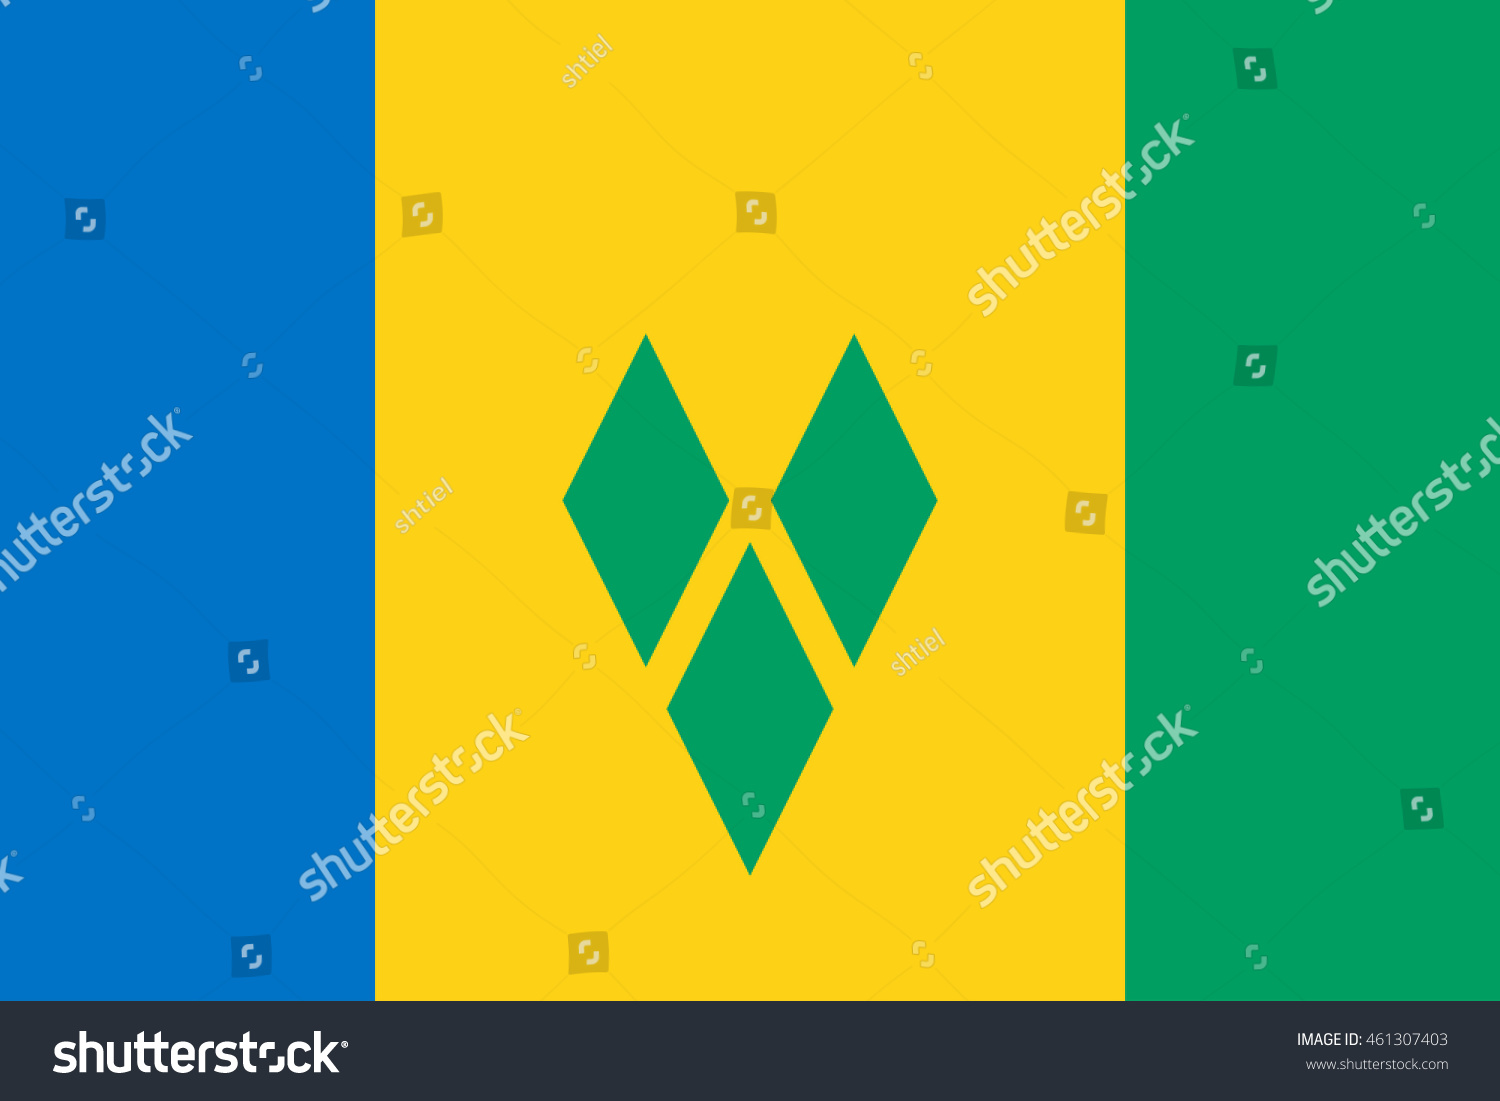 Download Flag Of Saint Vincent And The Grenadines. Vector.Accurate ...